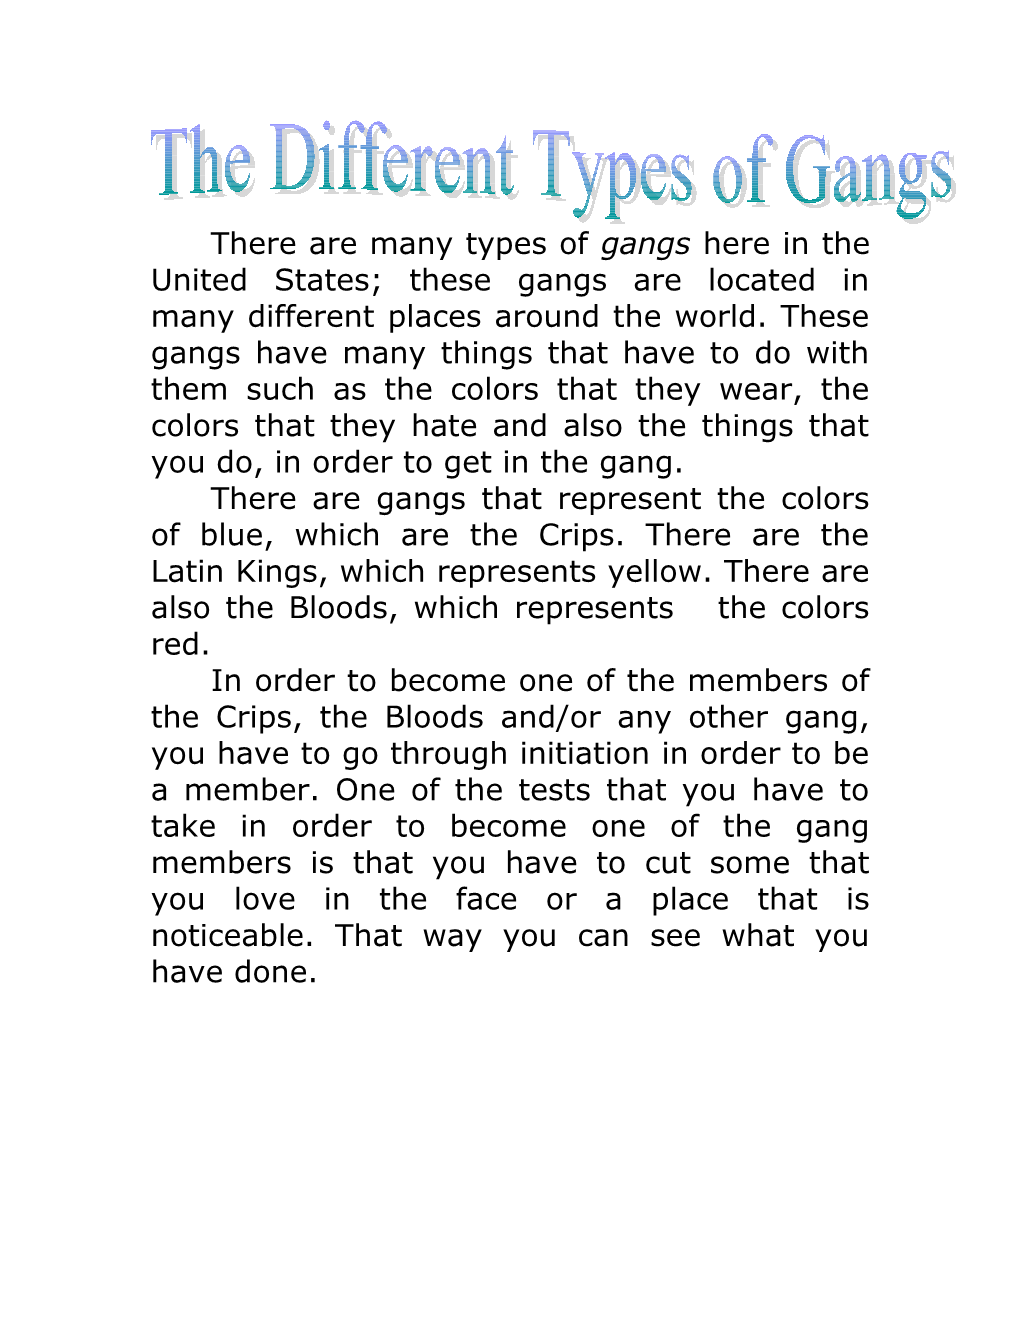 The Different Types of Gangs